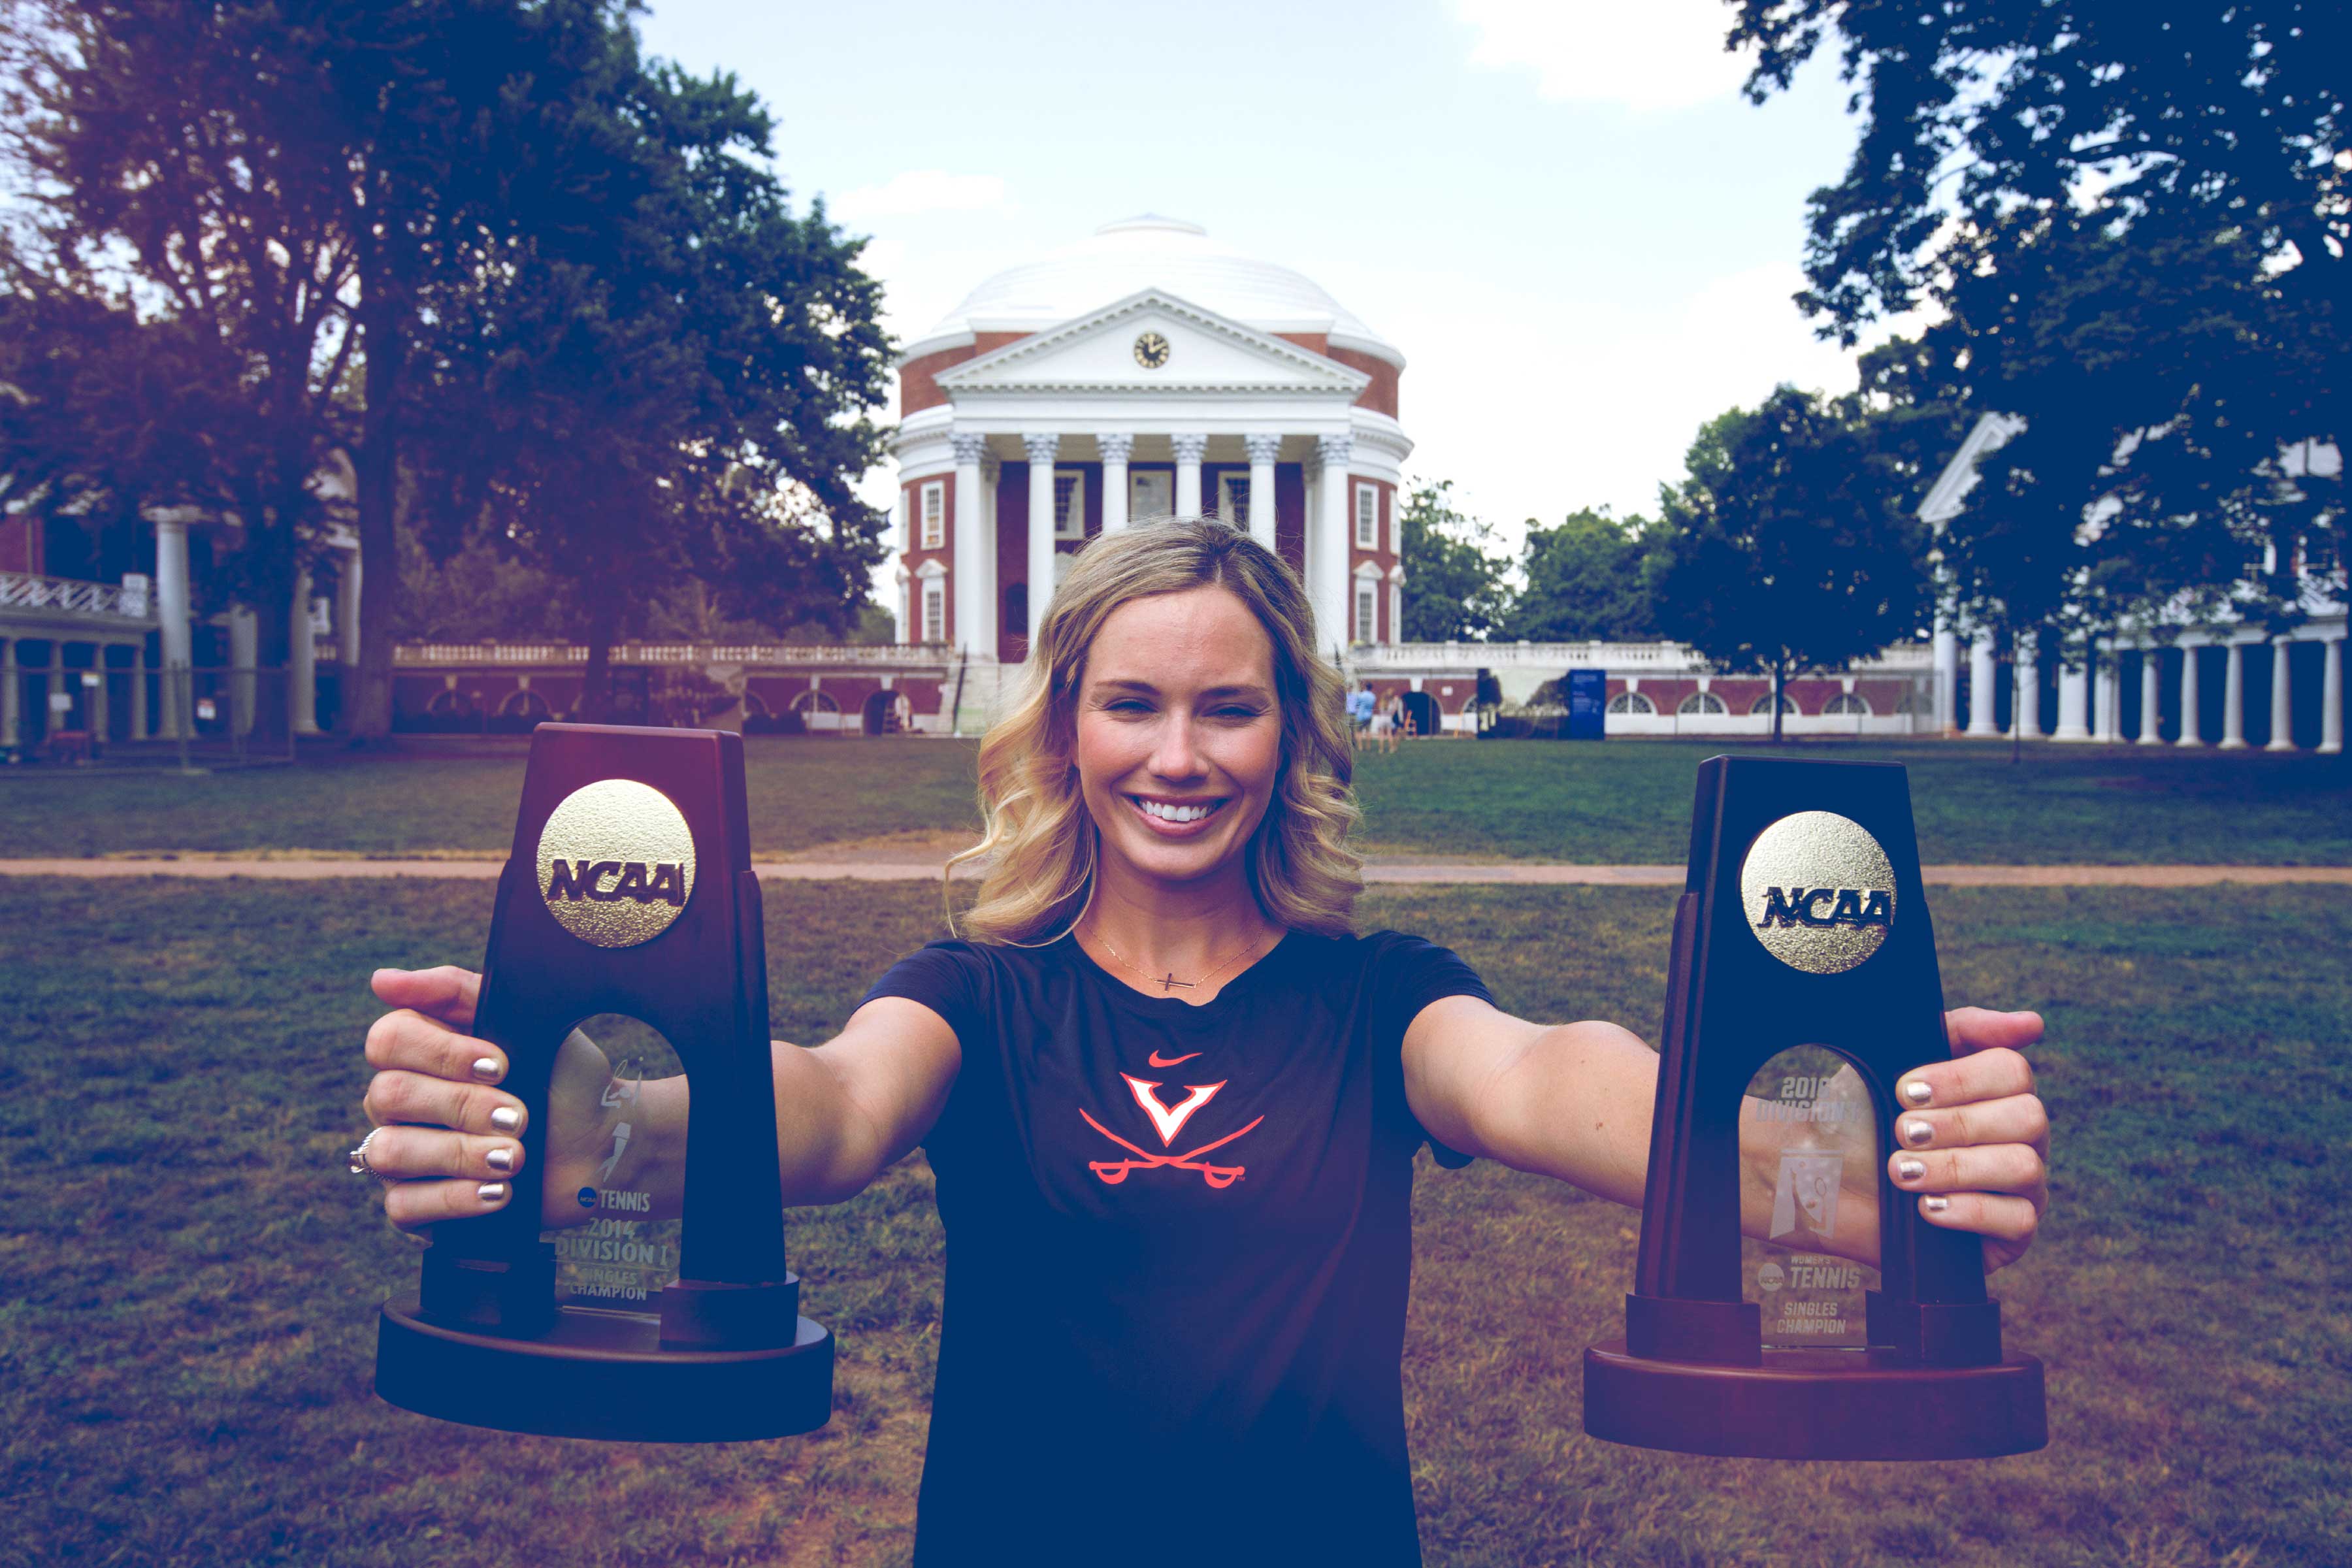 Danielle Collins holding her two NCAA trophies on the Lawn in front of the Rotunda